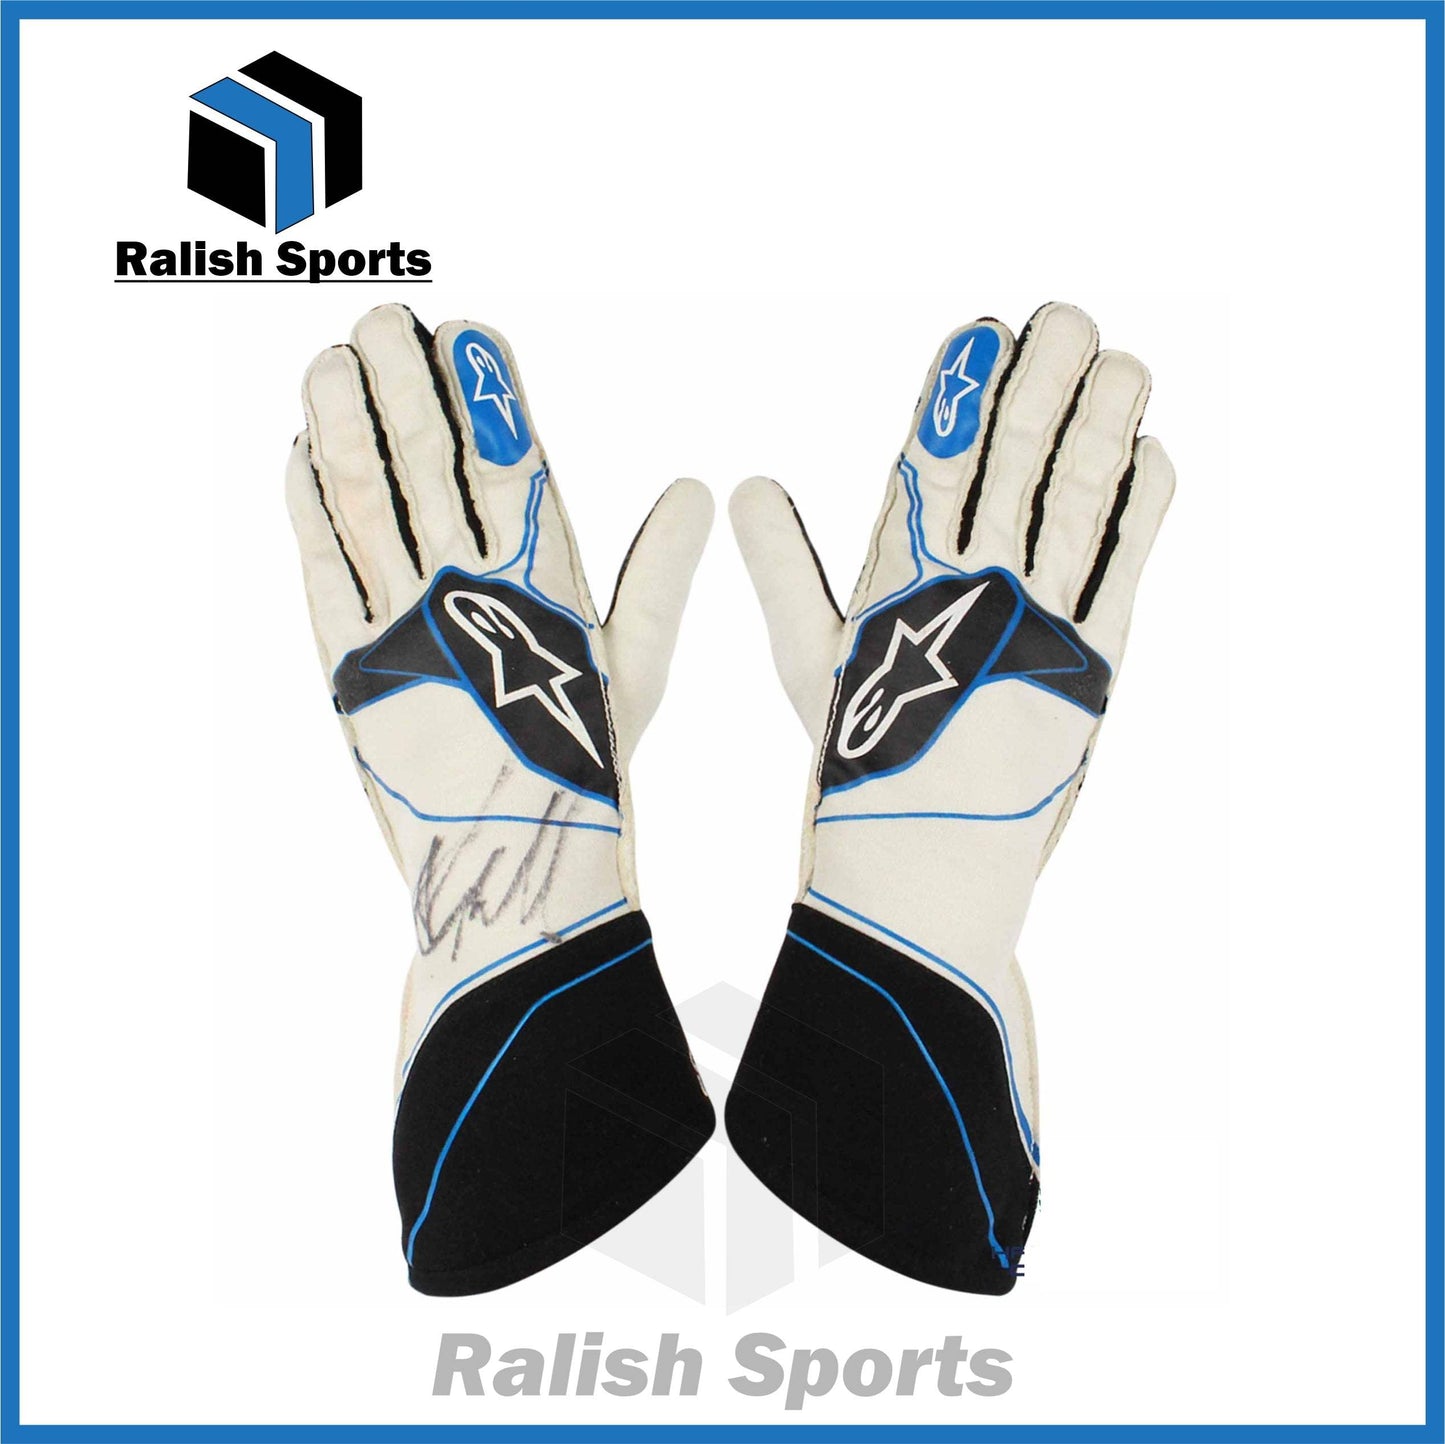 George Russell Gloves 2019 - Ralish Sports